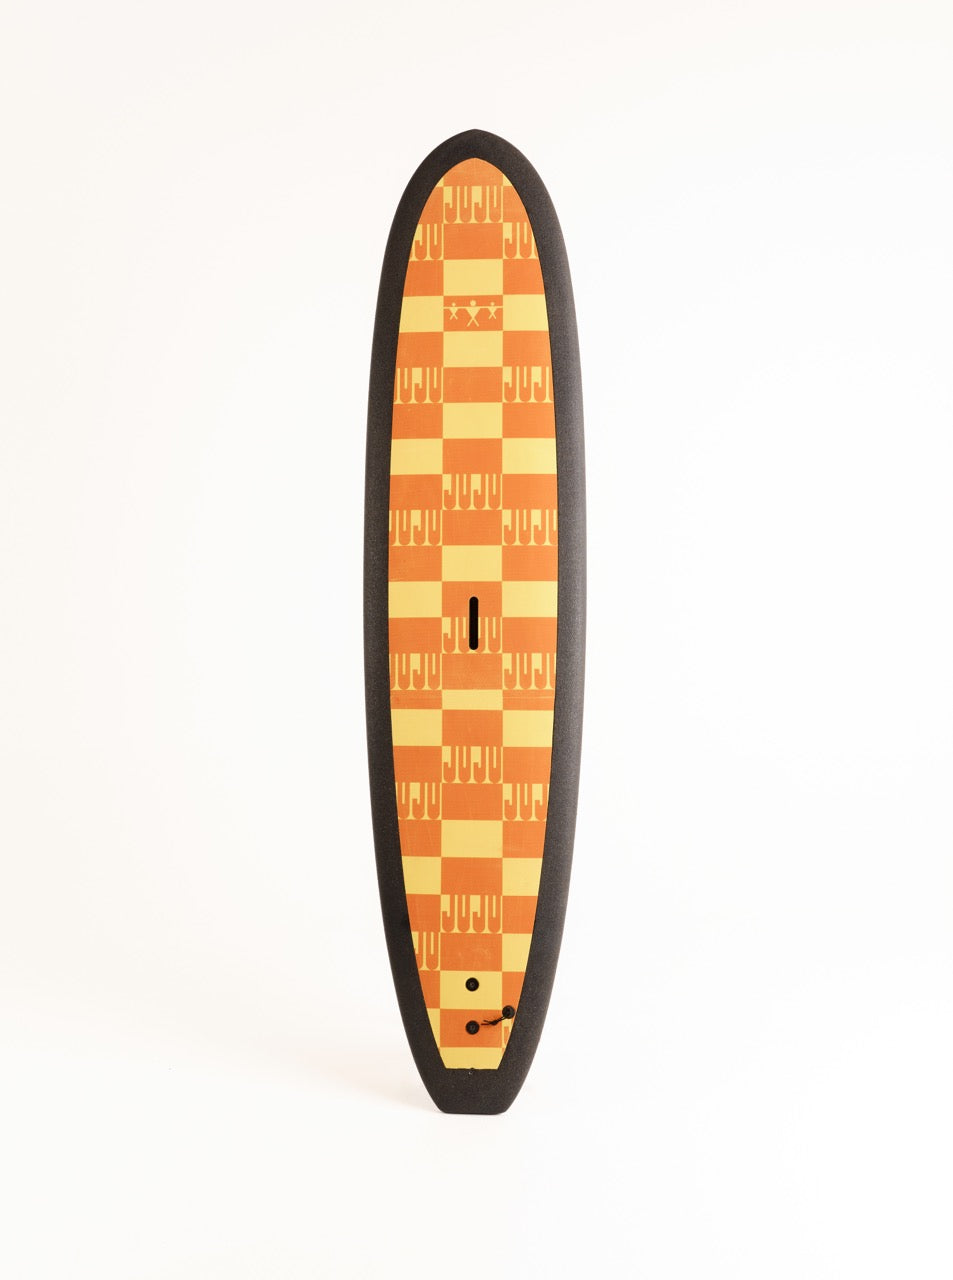 A light yellow and orange chequered 8 foot Positive Vibe Warriors Scout surfboard on a white background